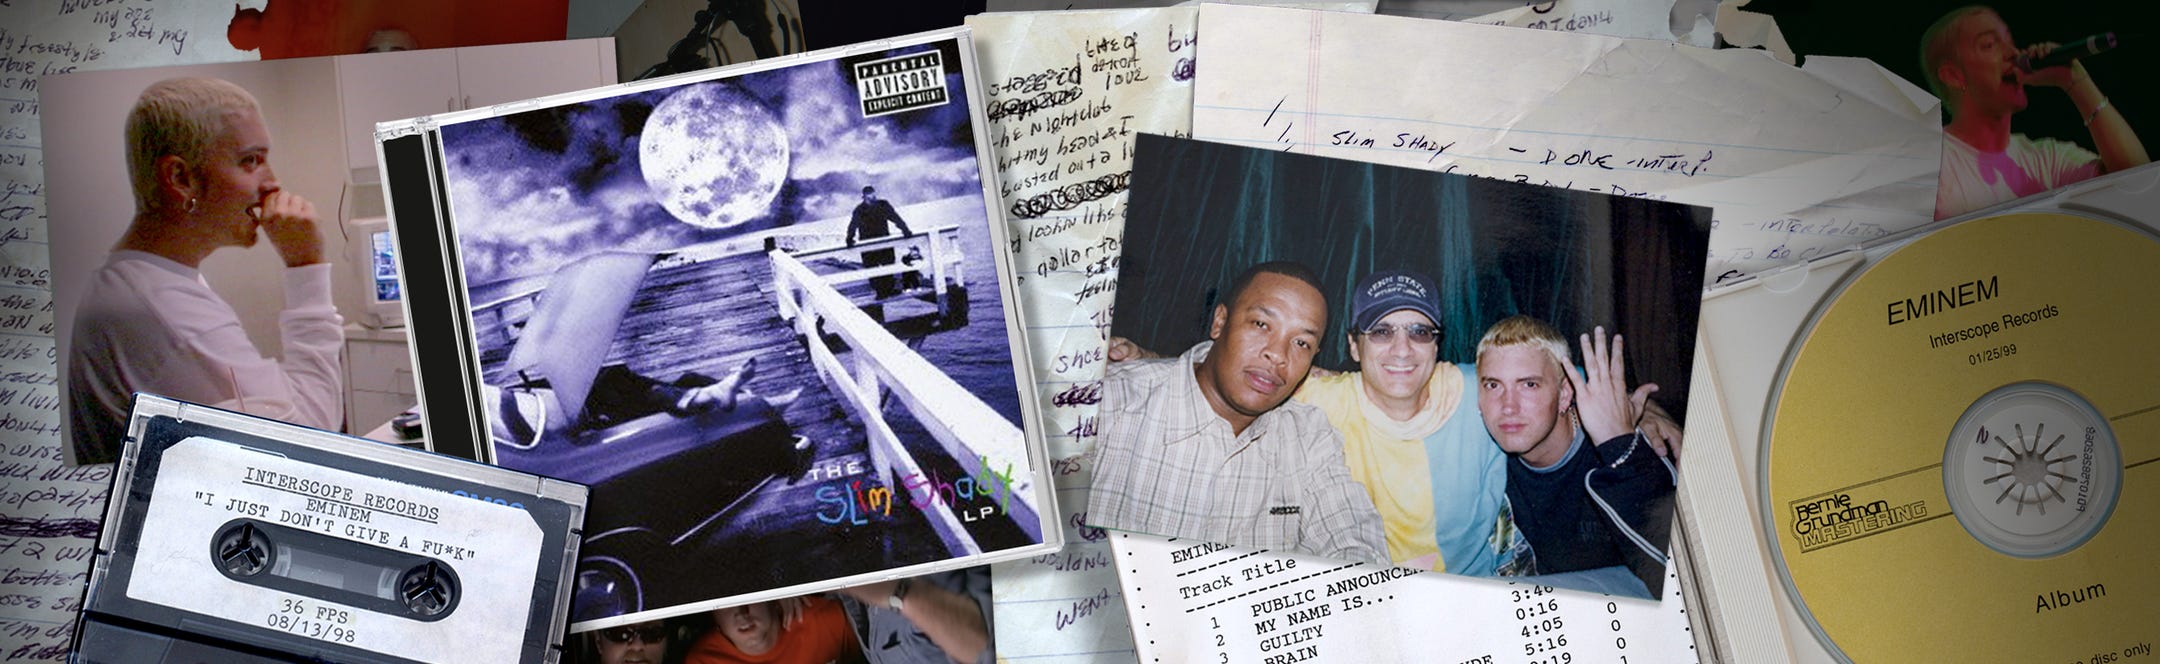 Eminem S Slim Shady Lp Turns 20 An Oral History Of The